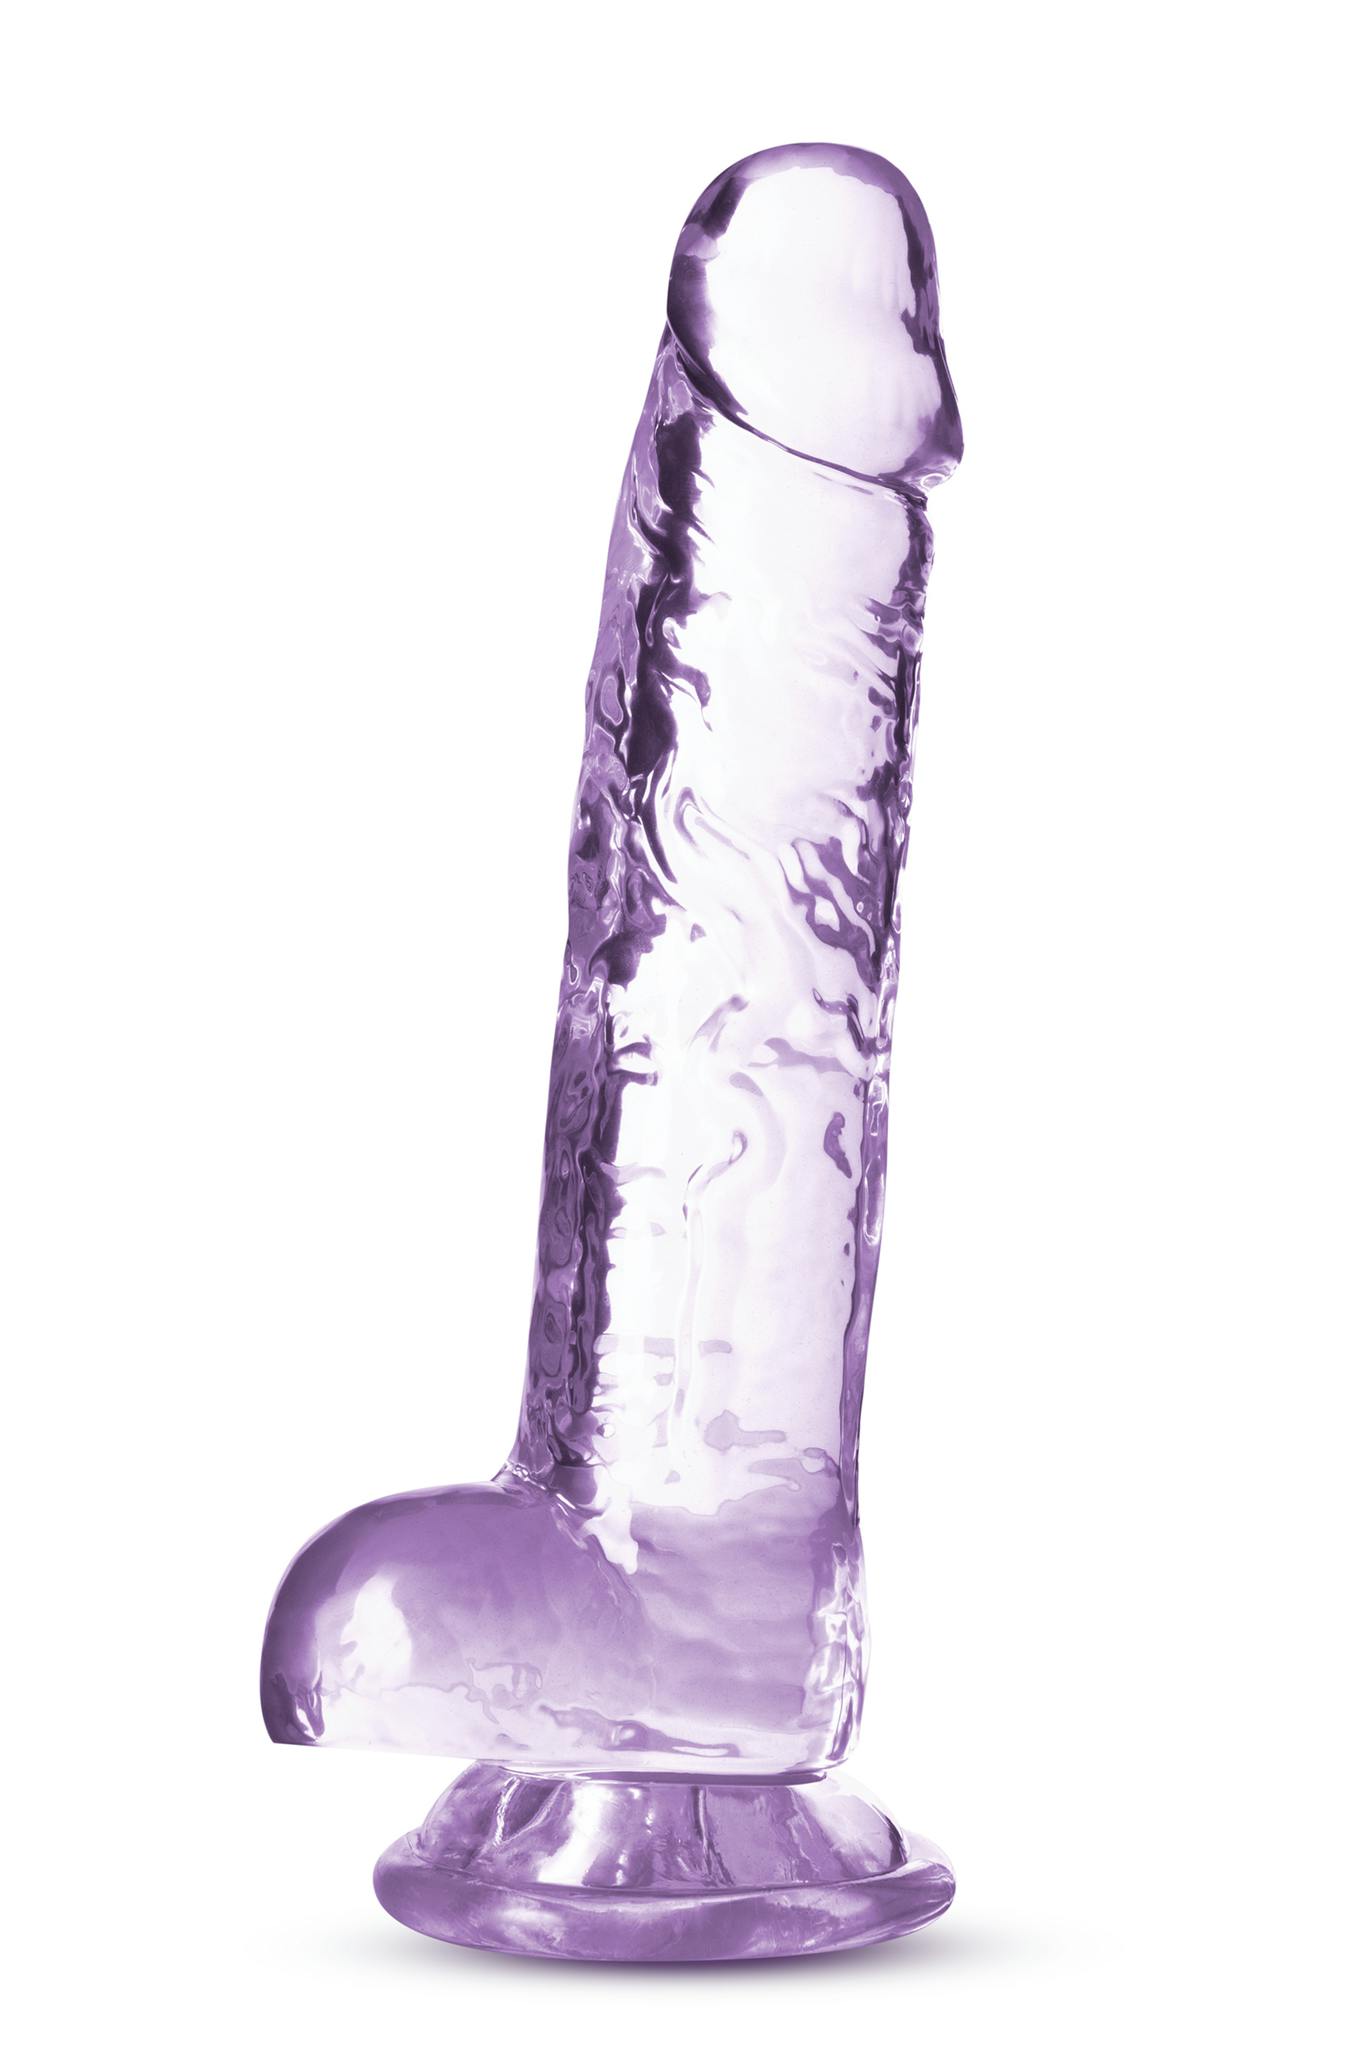 Naturally Yours 7" Crystalline Dildo, Amethyst